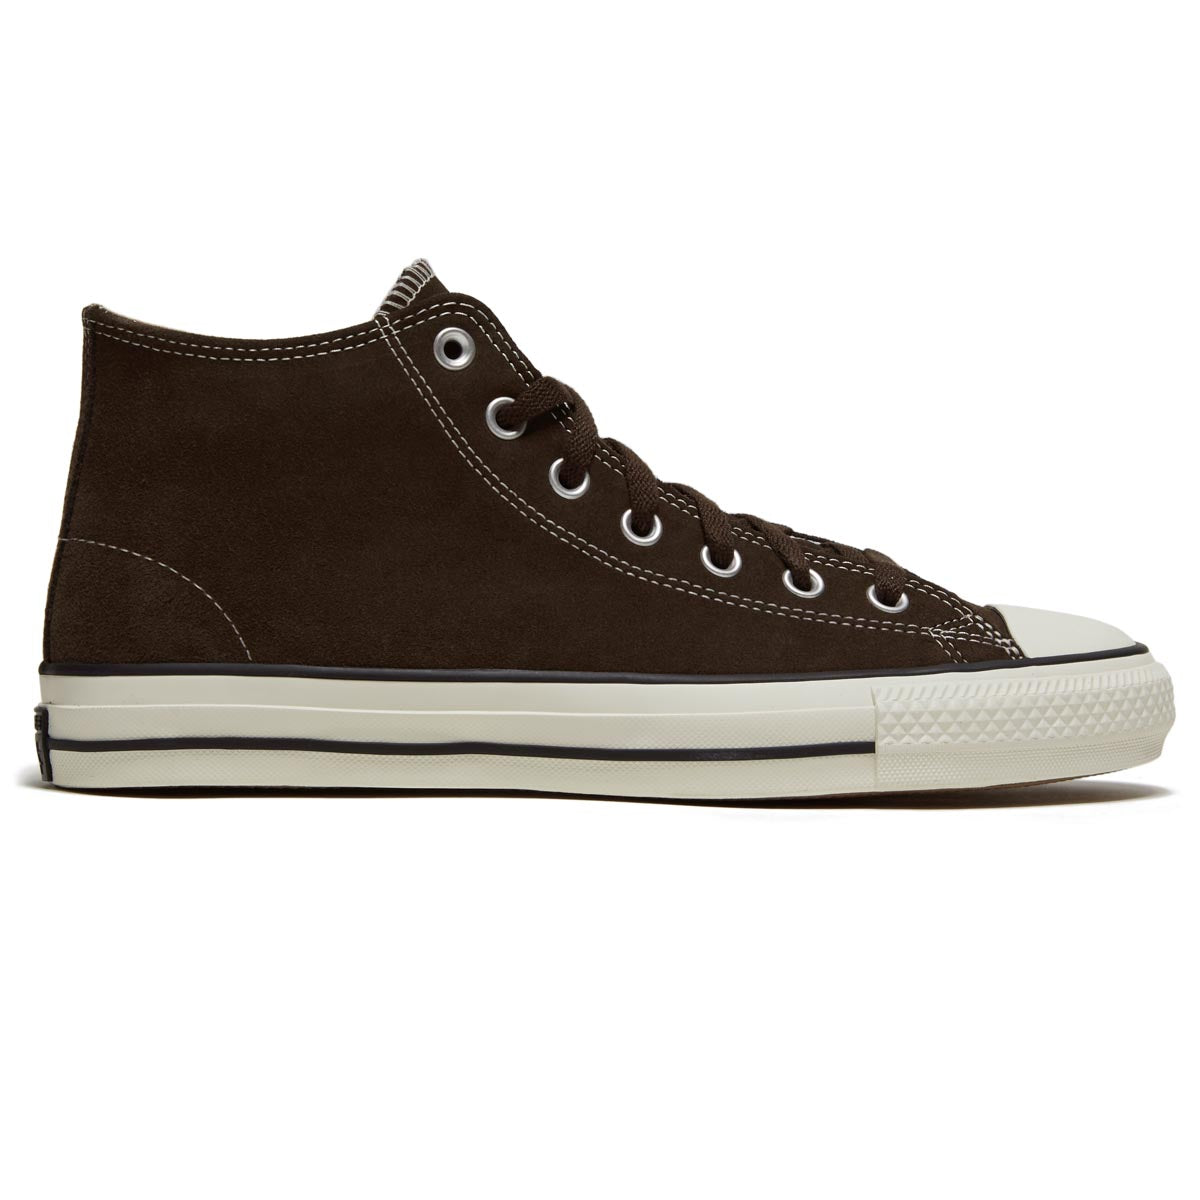 Converse Chuck Taylor All Star Pro Classic Suede Mid Shoes - Fresh Brew/Egret/Black image 1